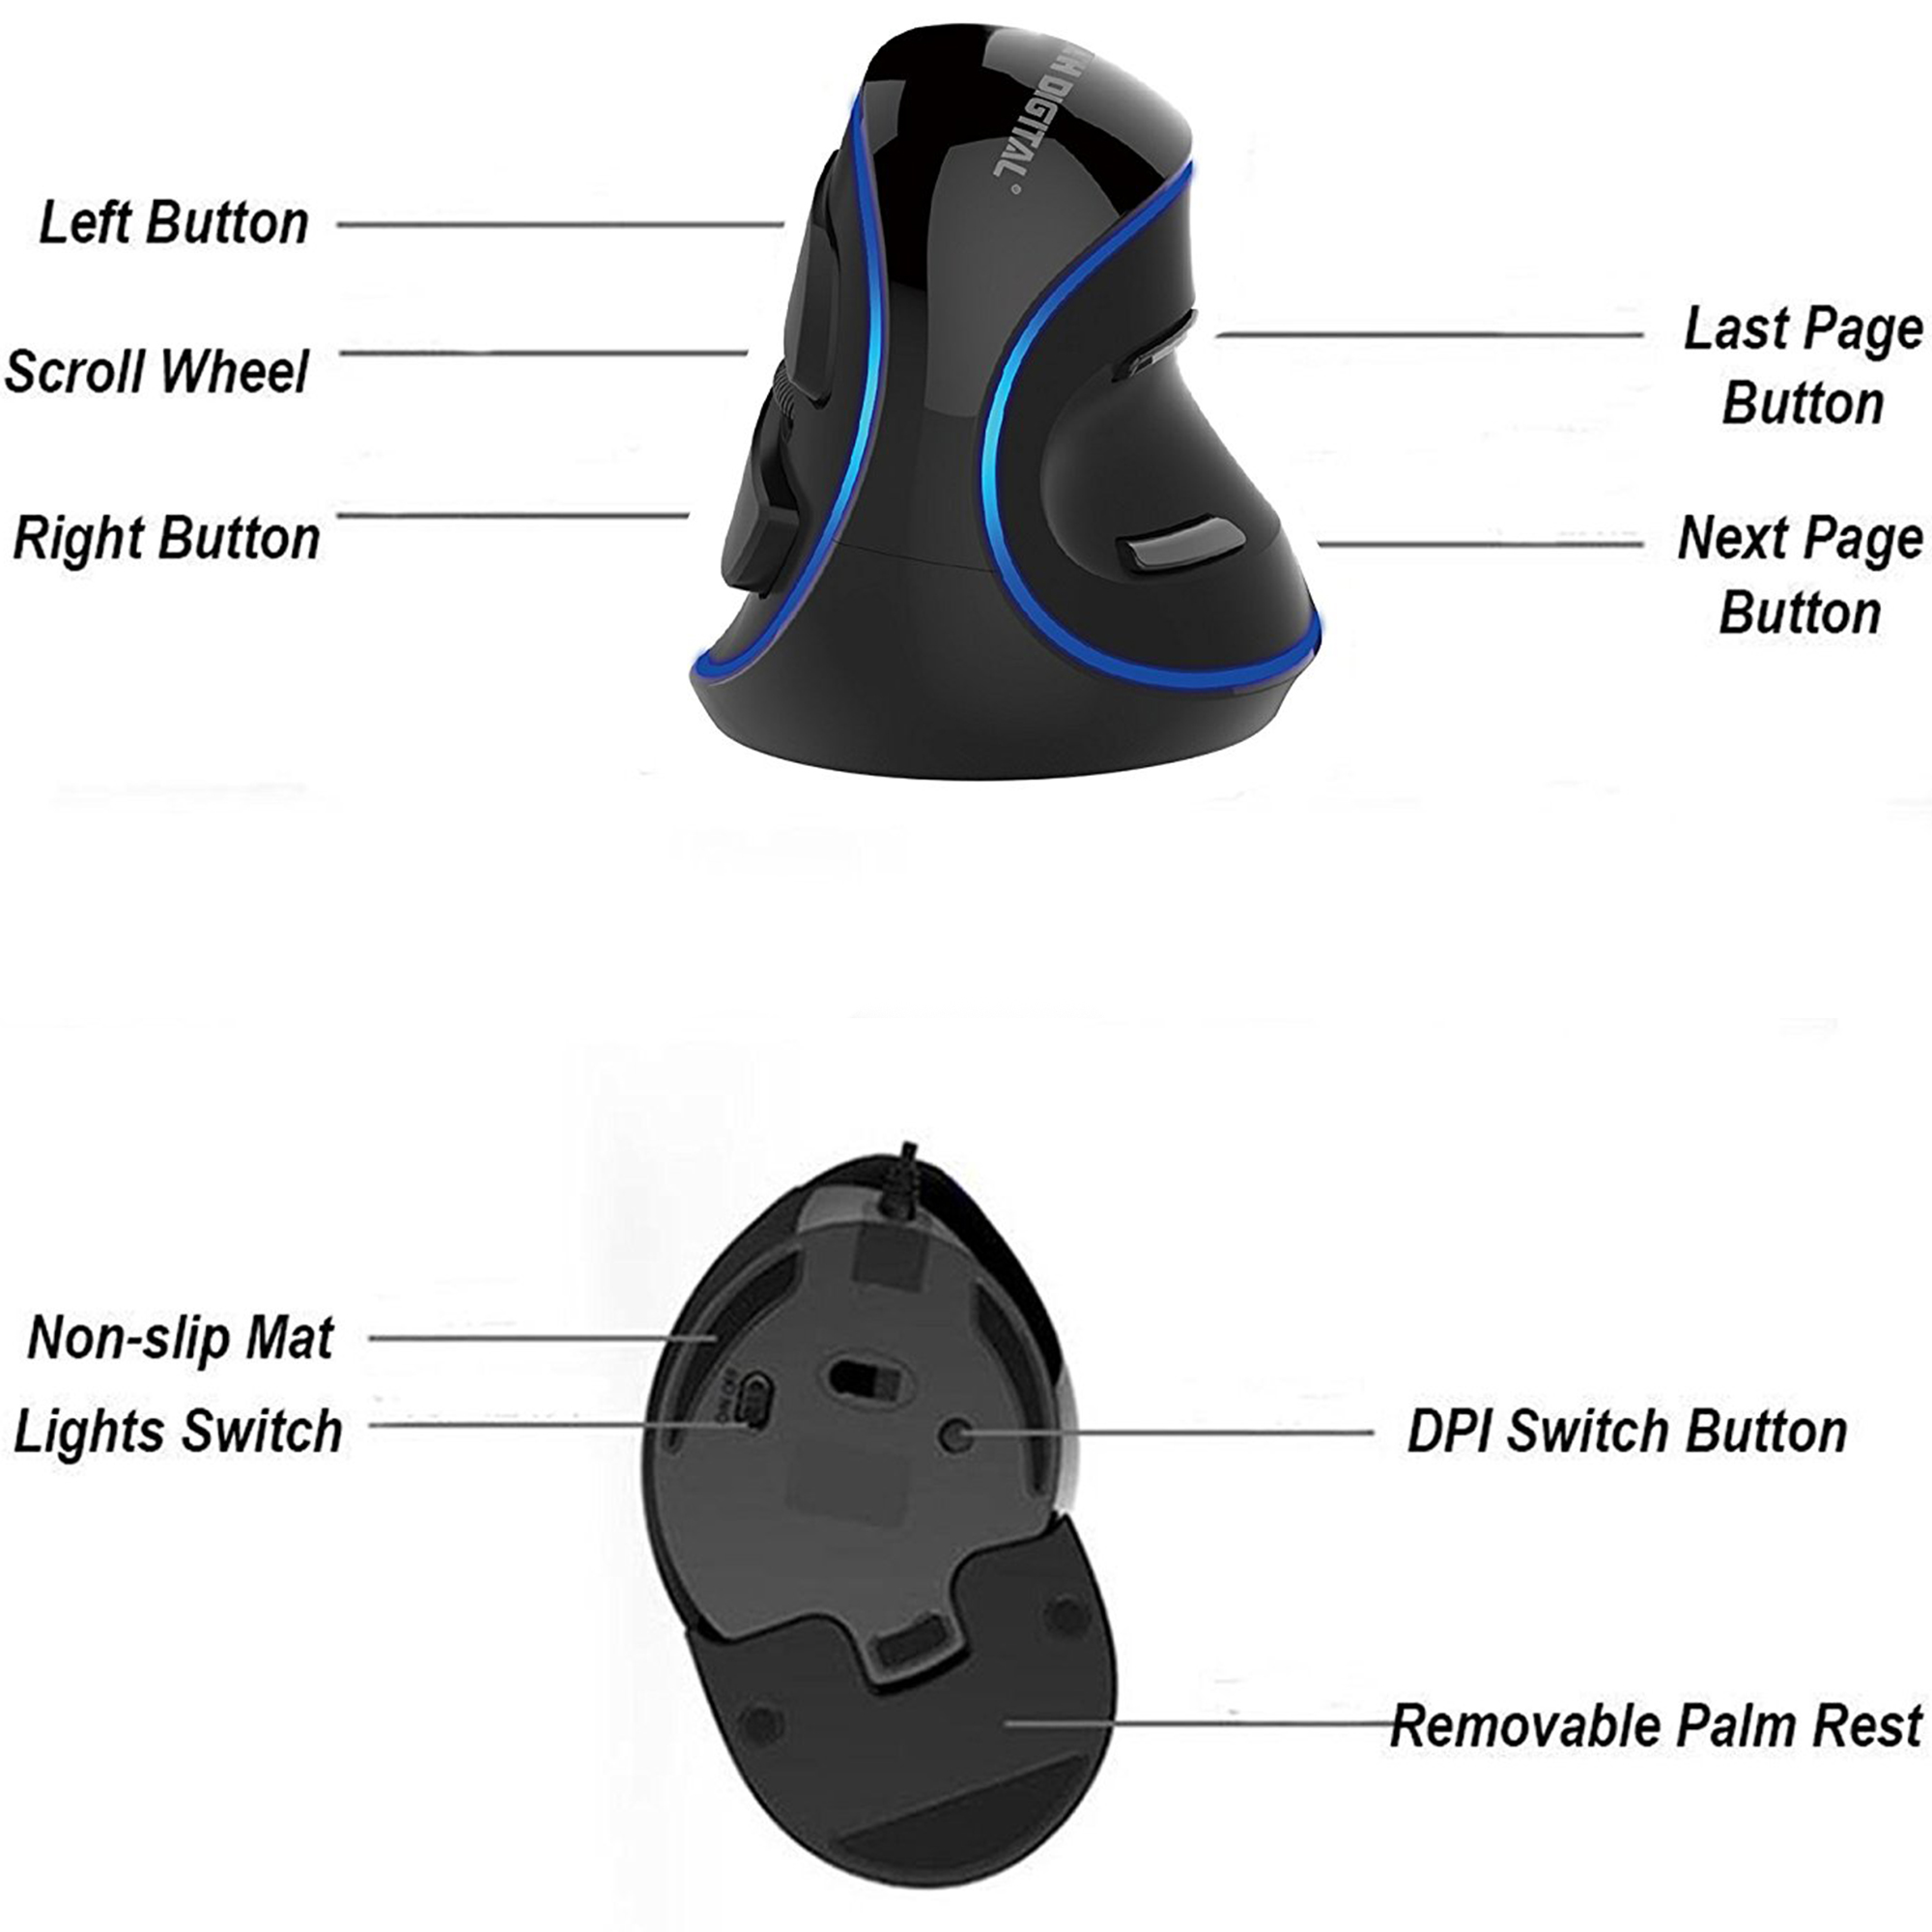 Wired Vertical Mouse with Removable Palm Rest (V628)